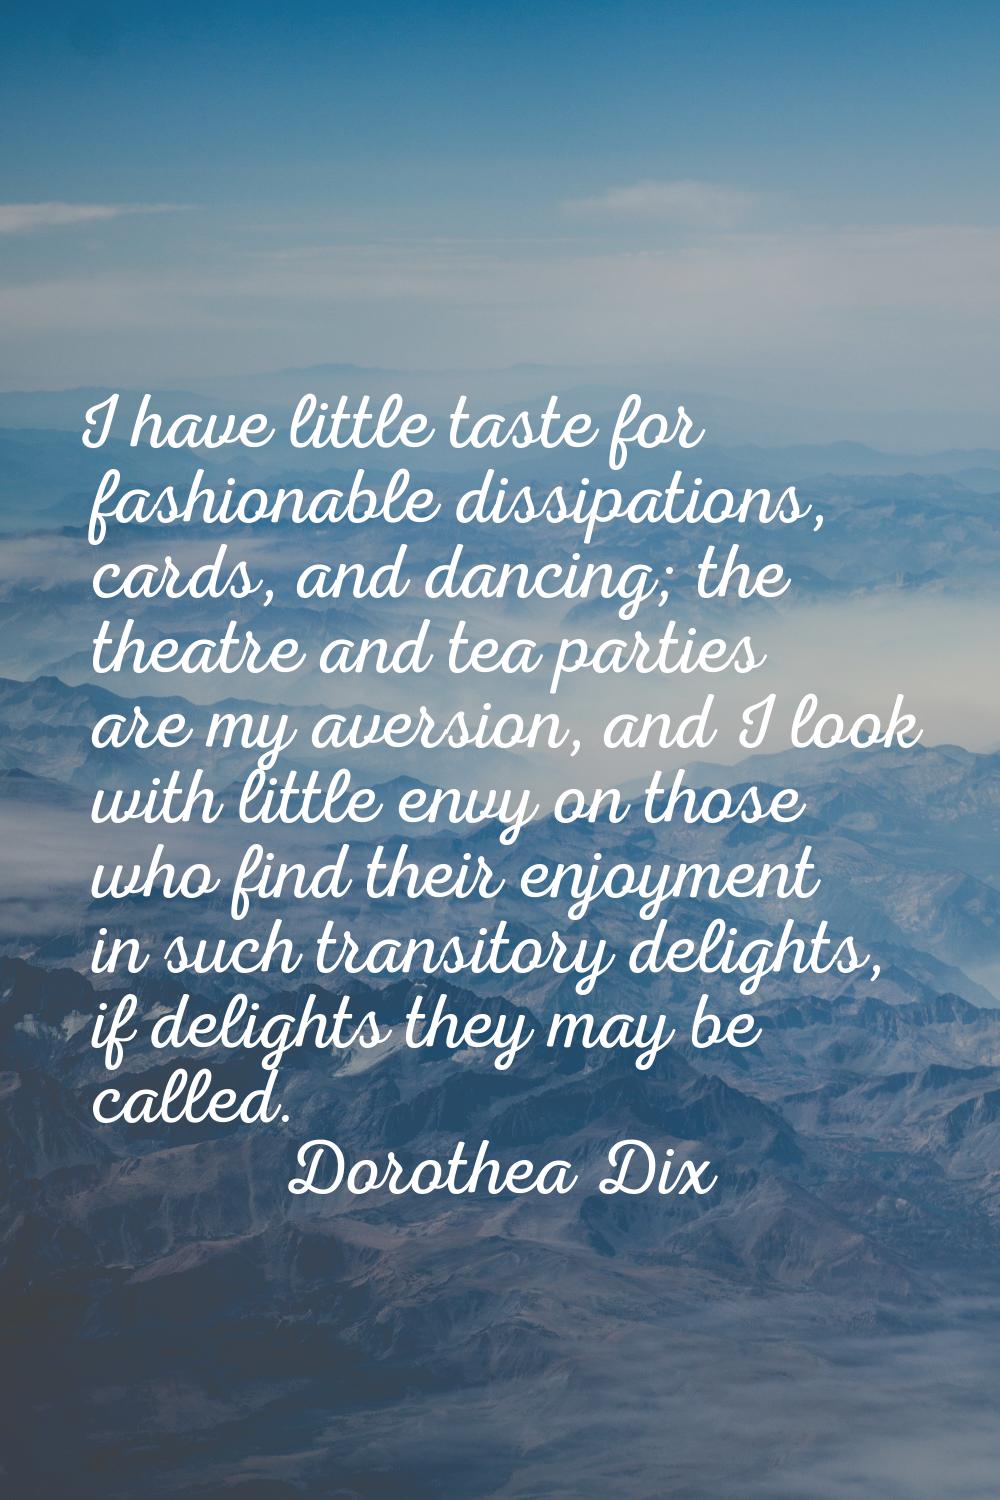 I have little taste for fashionable dissipations, cards, and dancing; the theatre and tea parties a